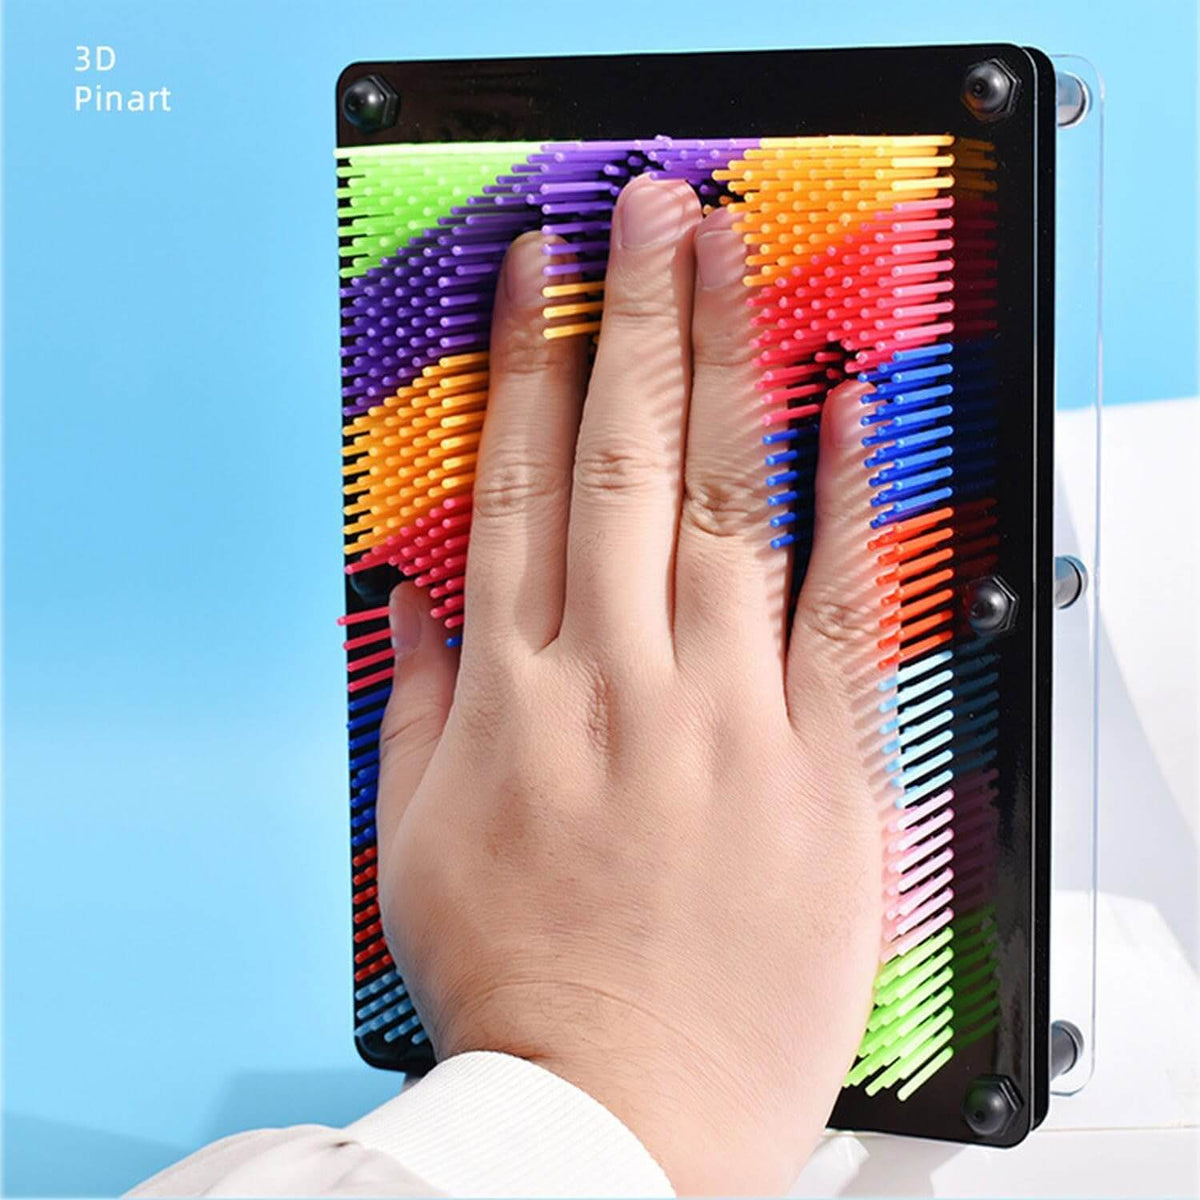 3d pin art rainbow where a hand is pressing it